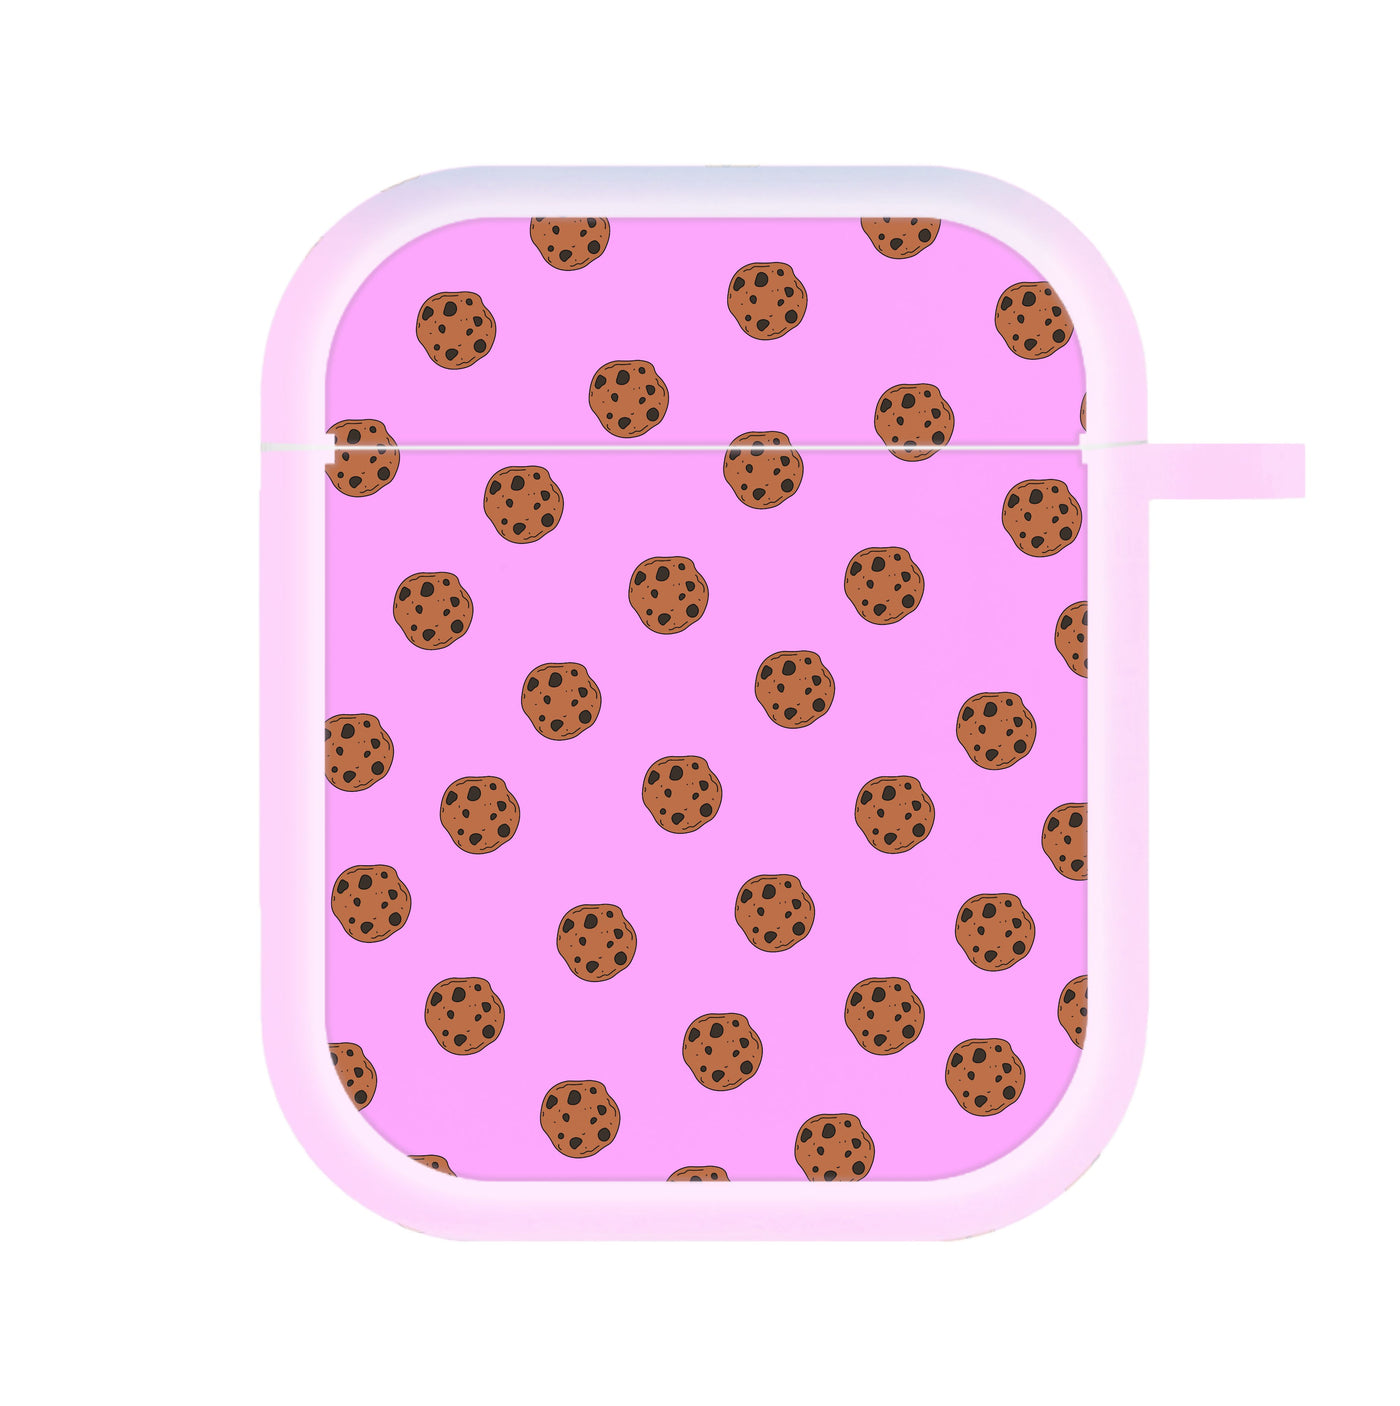 Cookies - Biscuits Patterns AirPods Case